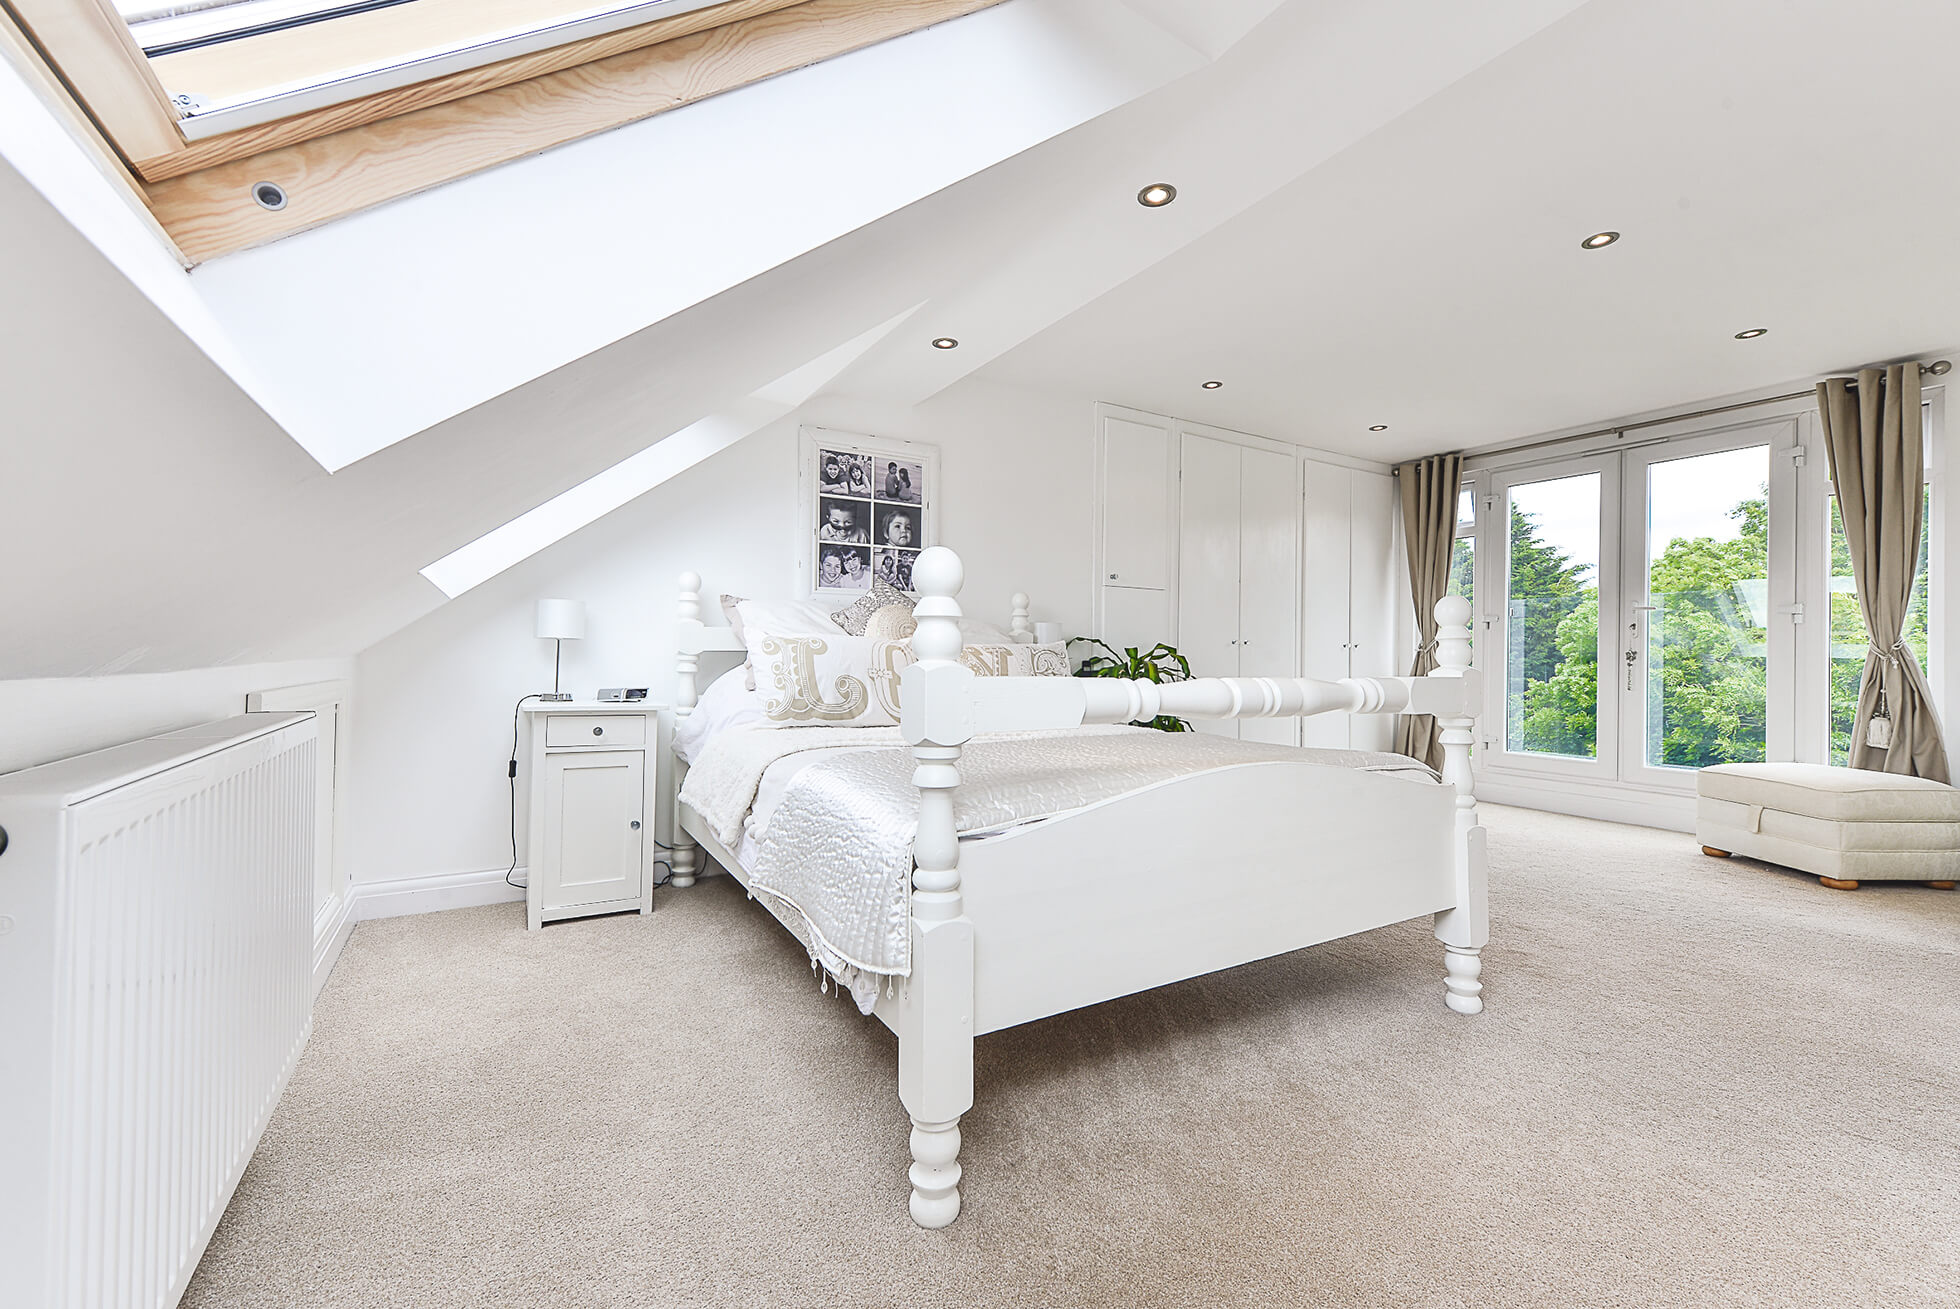 Do you have a question about converting your Loft in Little Berkhamsted? Here are the most popular questions asked by our clients.